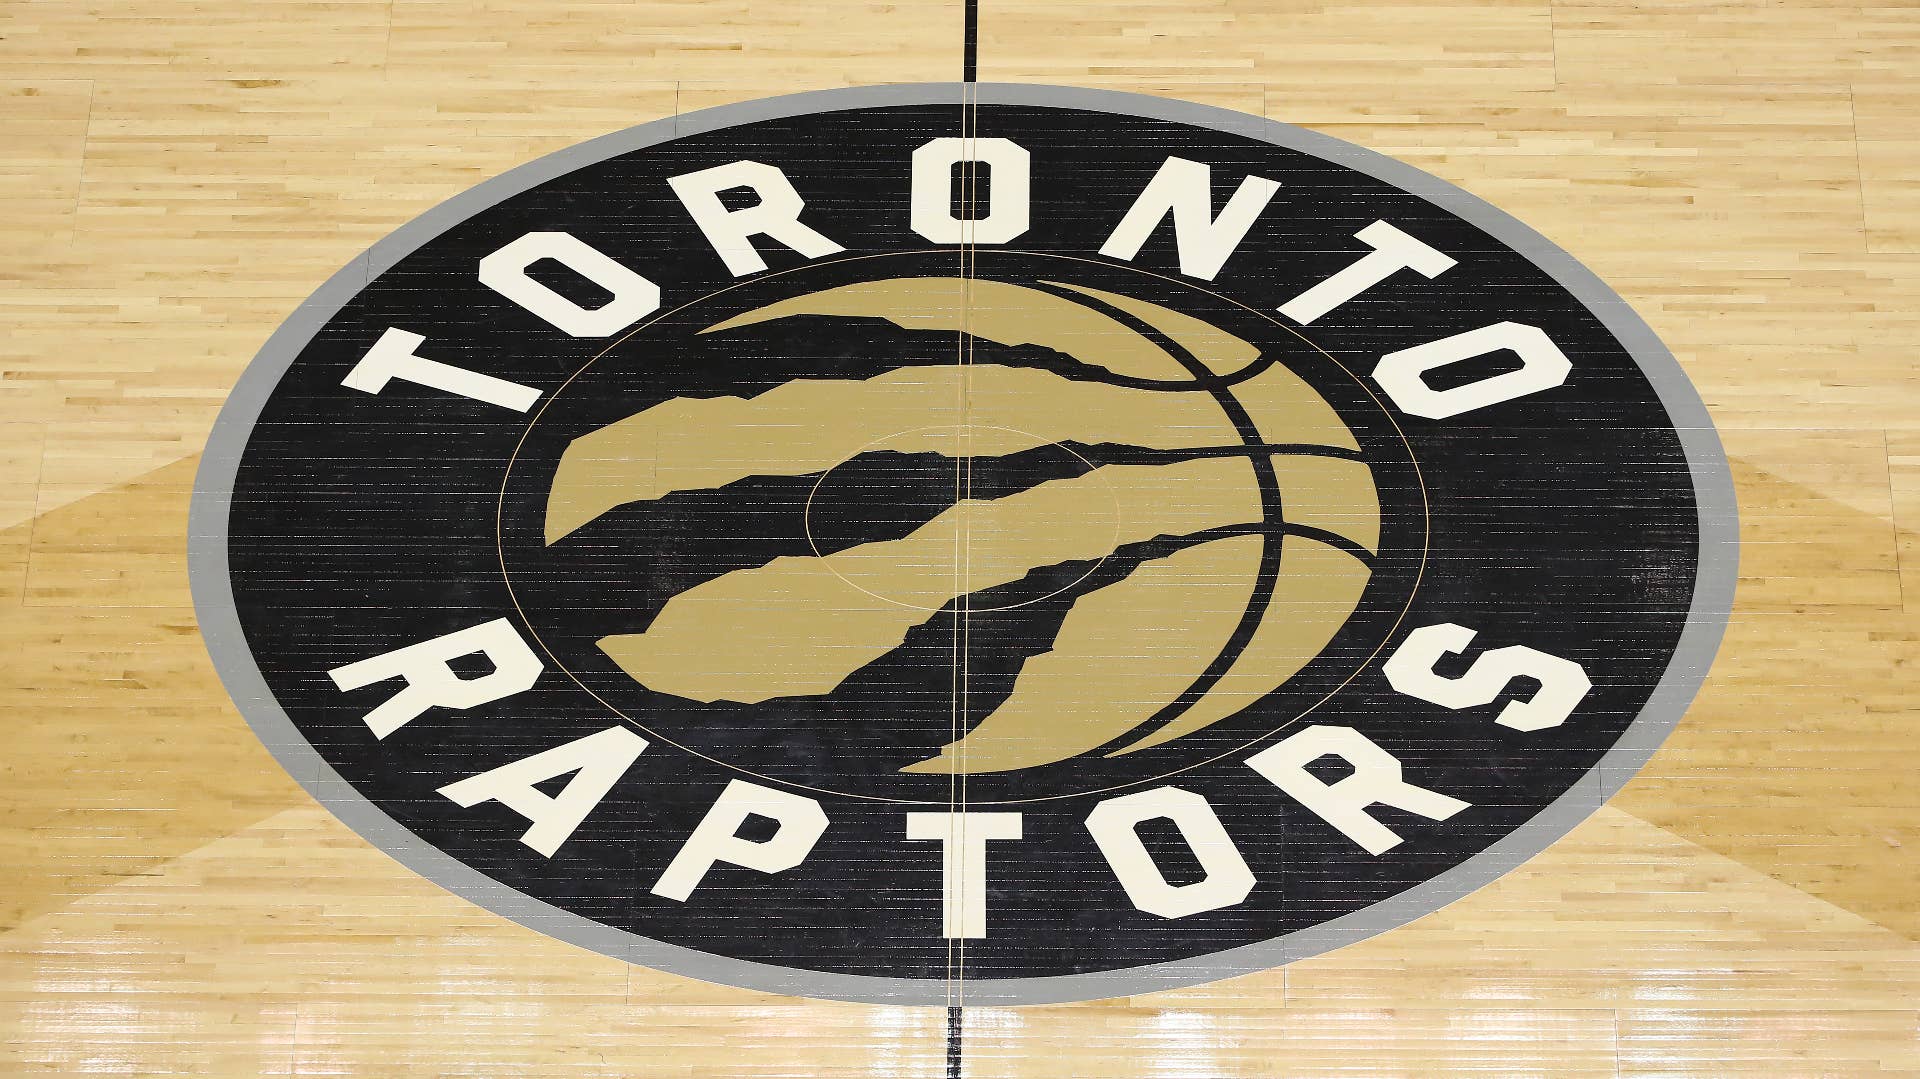 The team logo decal at center court on Welcome Toronto night during the Toronto Raptors NBA game.